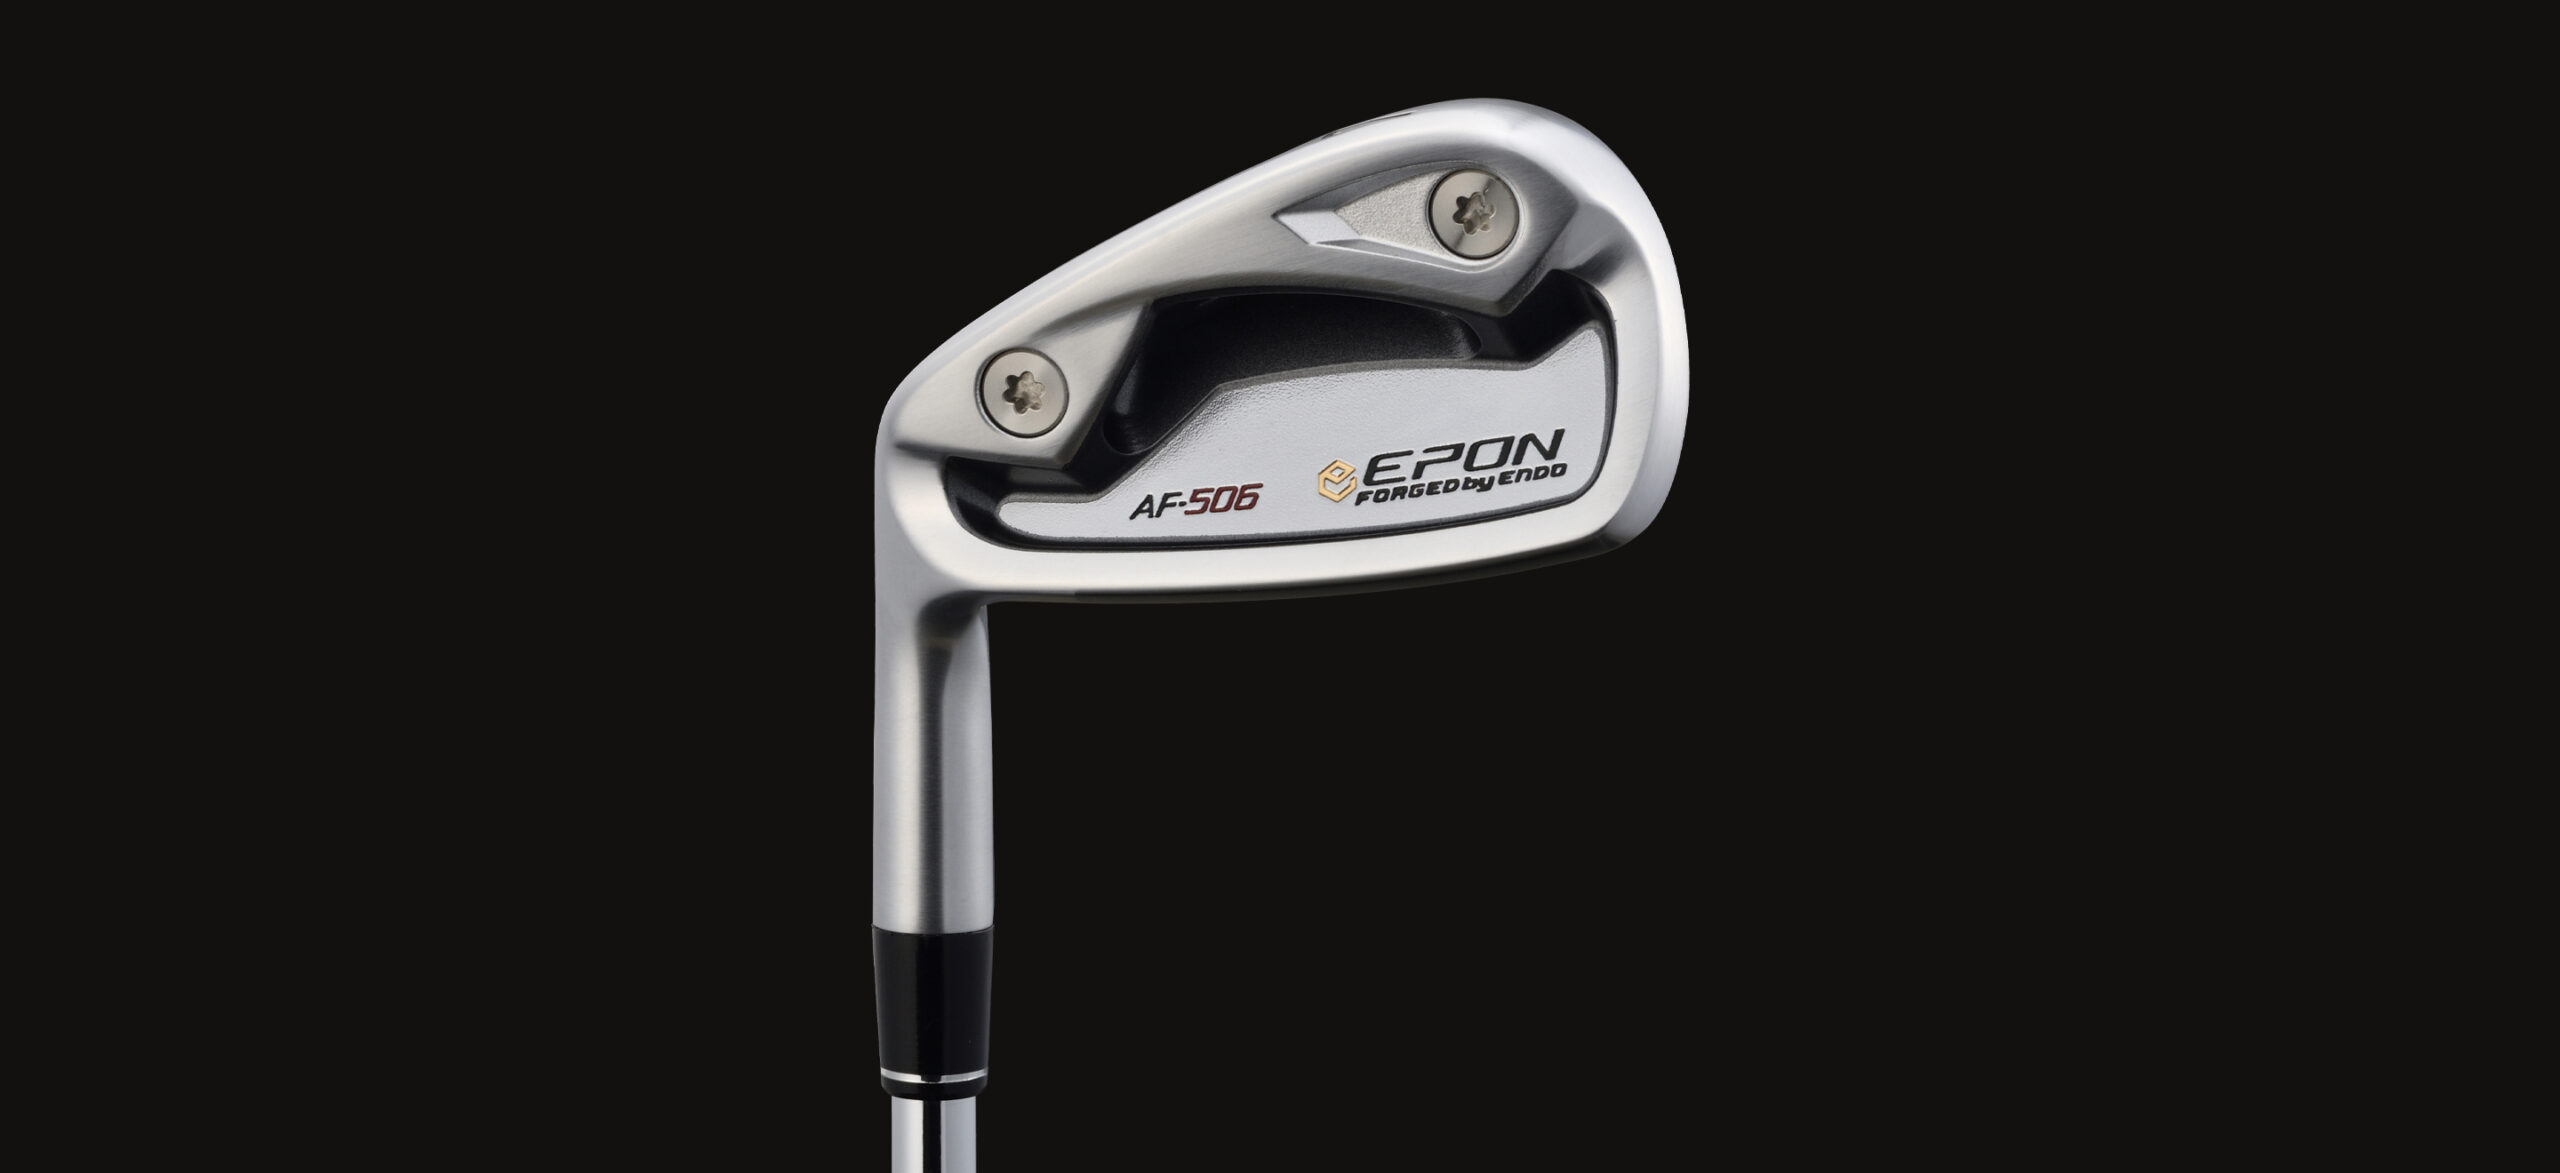 AF-506 - EPON GOLF Official（エポンゴルフ）